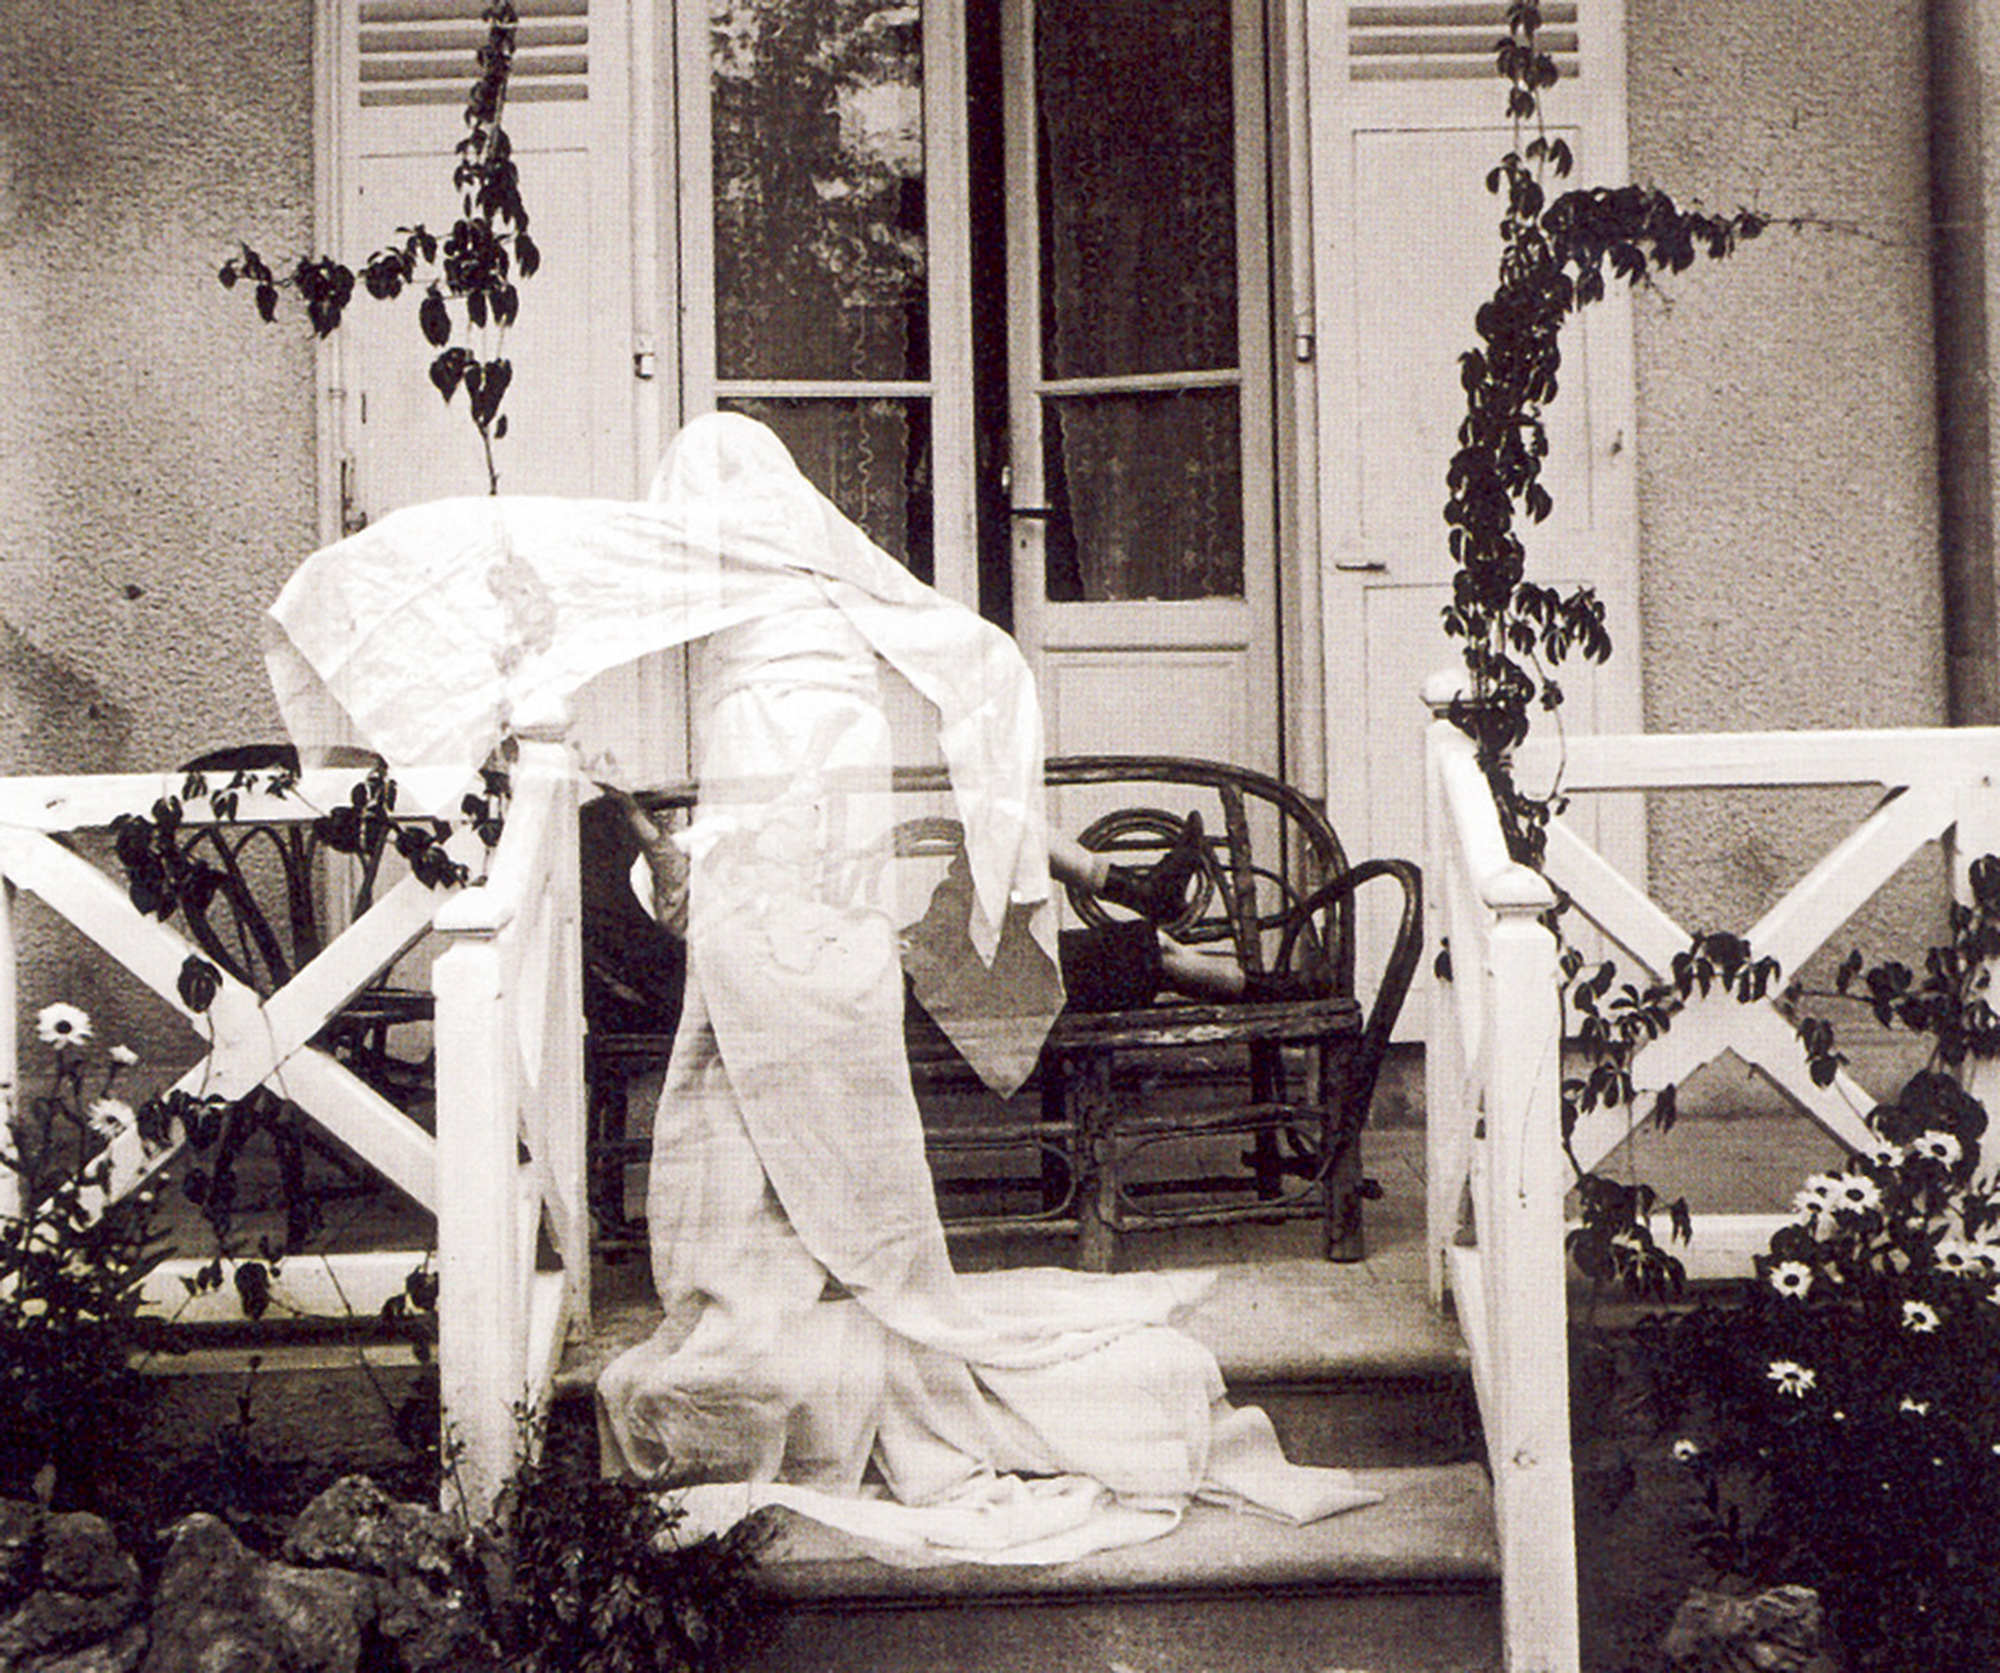 Jacques Henri Lartigue’s photograph of his brother Maurice (nicknamed Zissou) dressed as a ghost, 1905. The eleven-year-old artist described the process in his journal: “I ask Zissou to dress up in a sheet. He comes and puts himself in front of the lens. I open the lens cap, I close it again. Zissou goes away and I open the lens cap again without him in the picture. And I really hope it’s going to be a fine ghost photograph.”